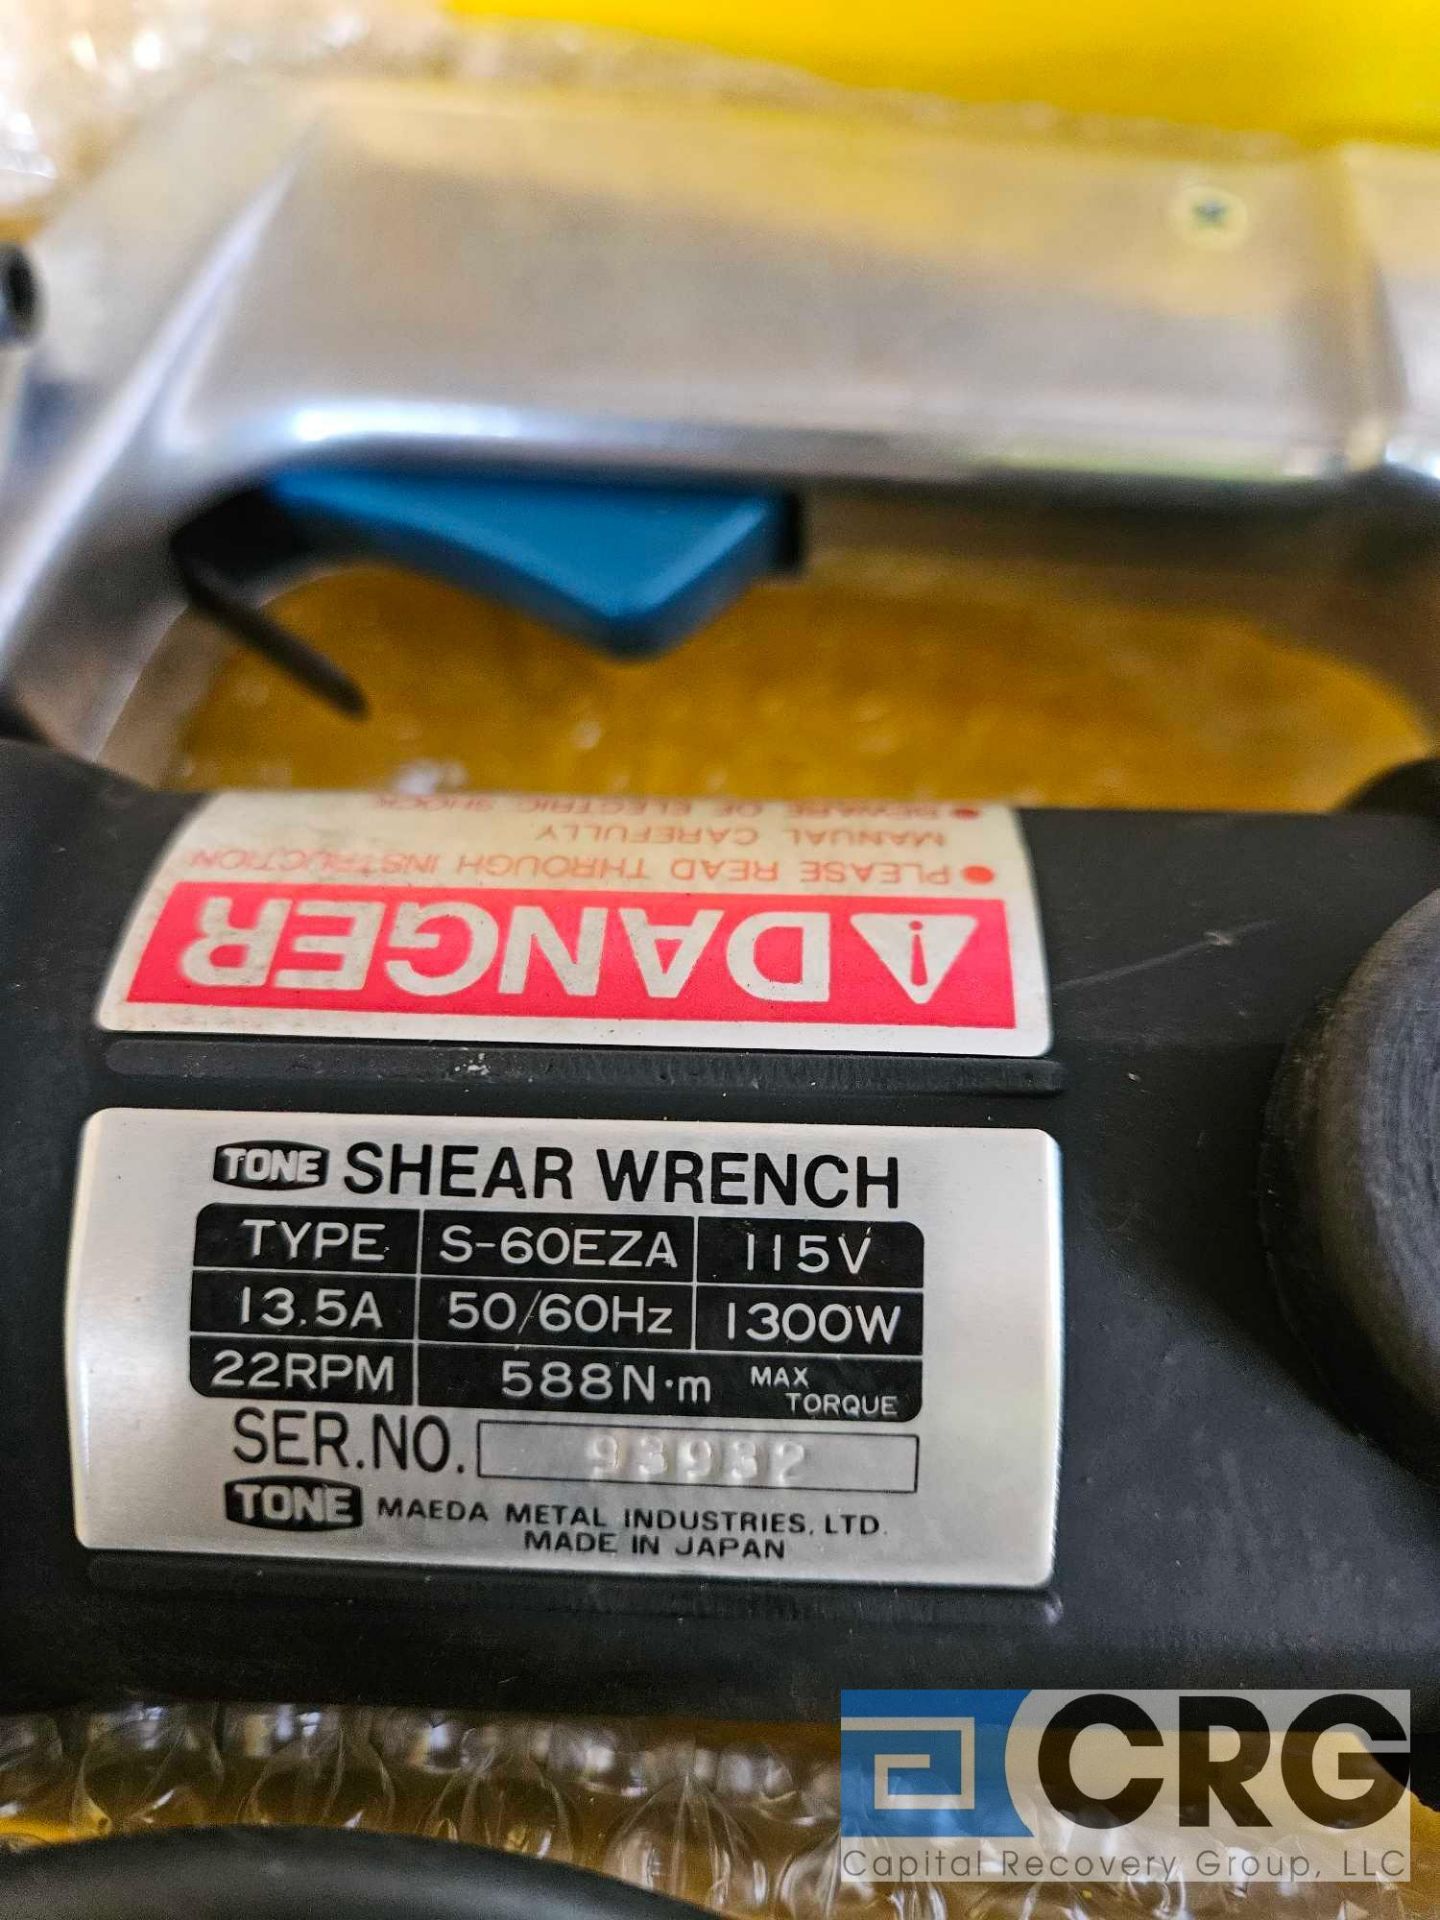 Tone Shear Wrench - Image 4 of 4